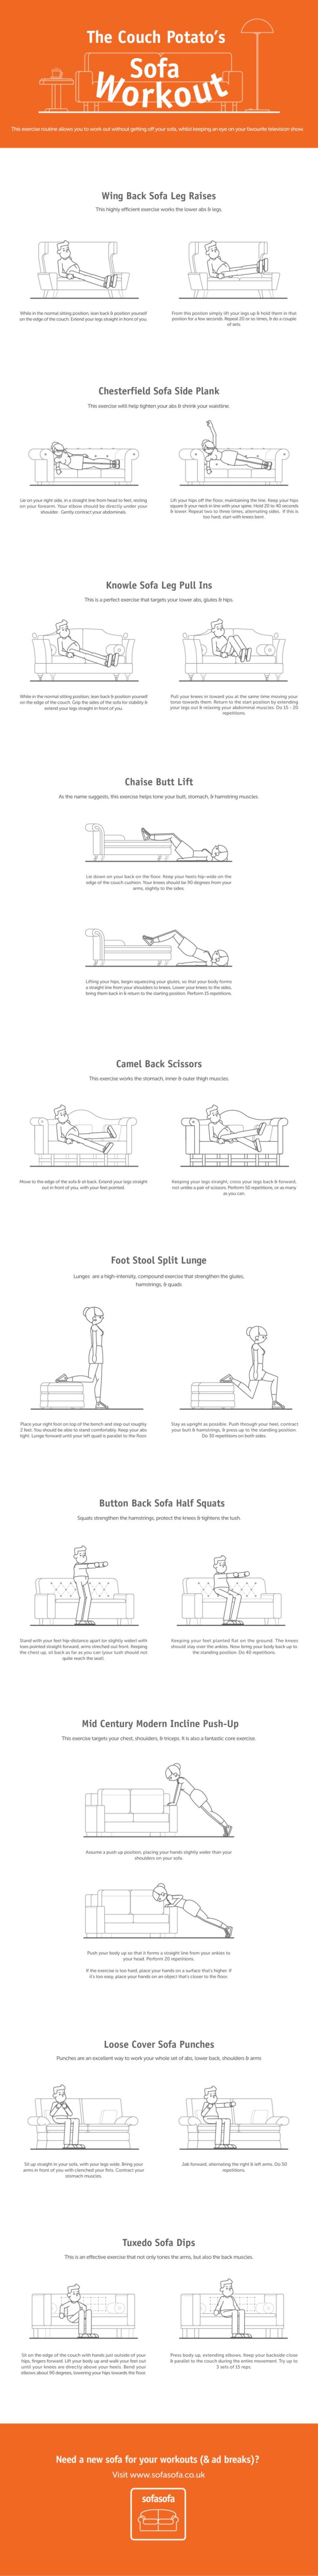 Sofa-Workout-Infographic (2)